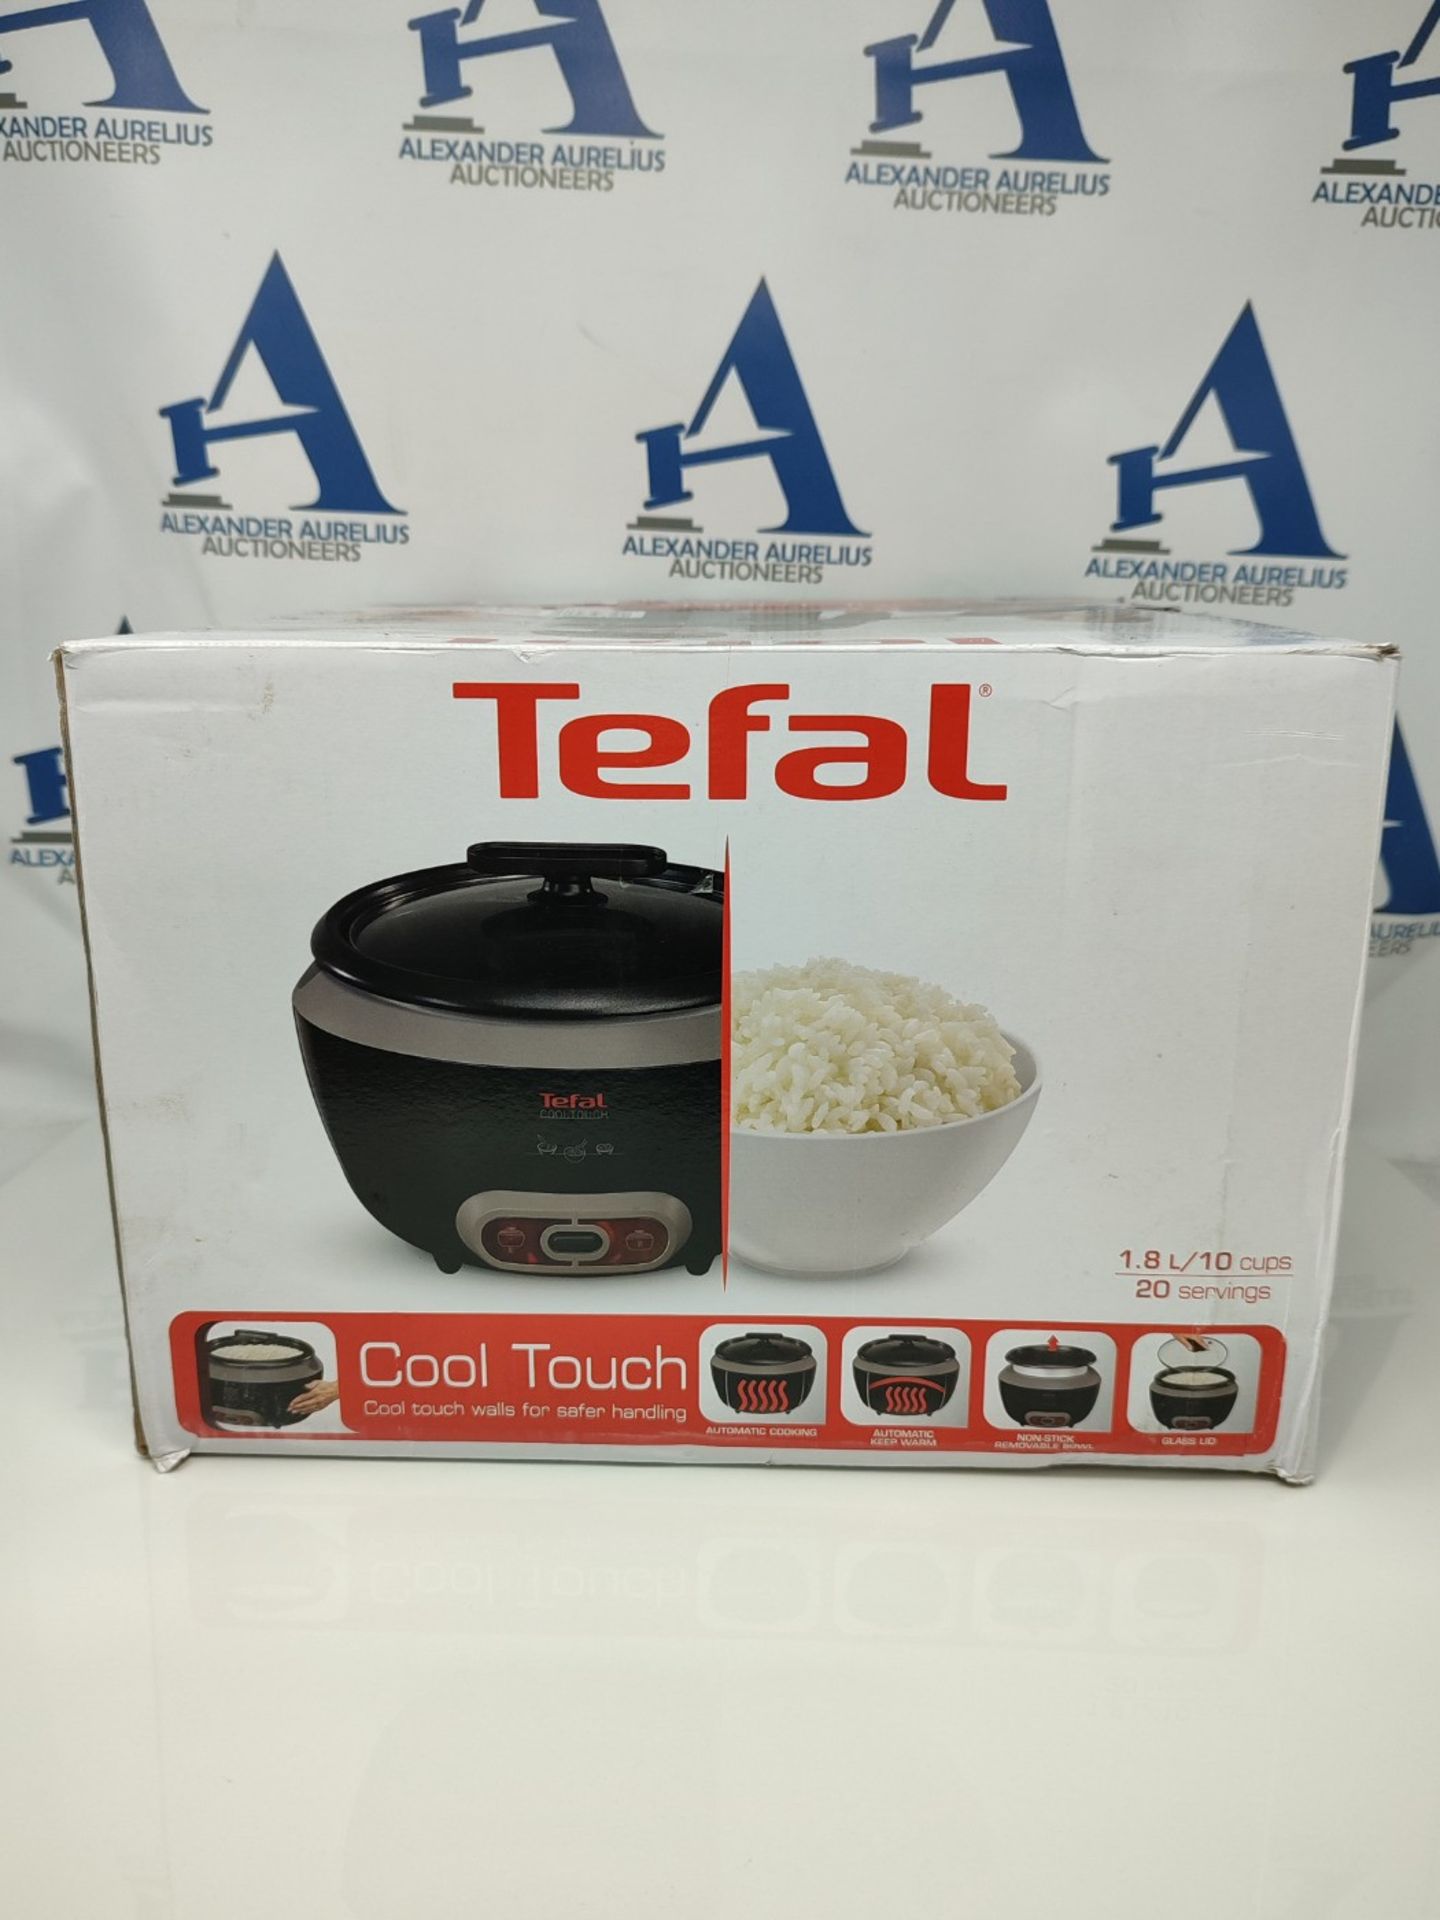 Tefal RK1568UK Cool Touch Rice Cooker, (20 Portions), 700 W, 1.8 Litre, Black - Image 2 of 3